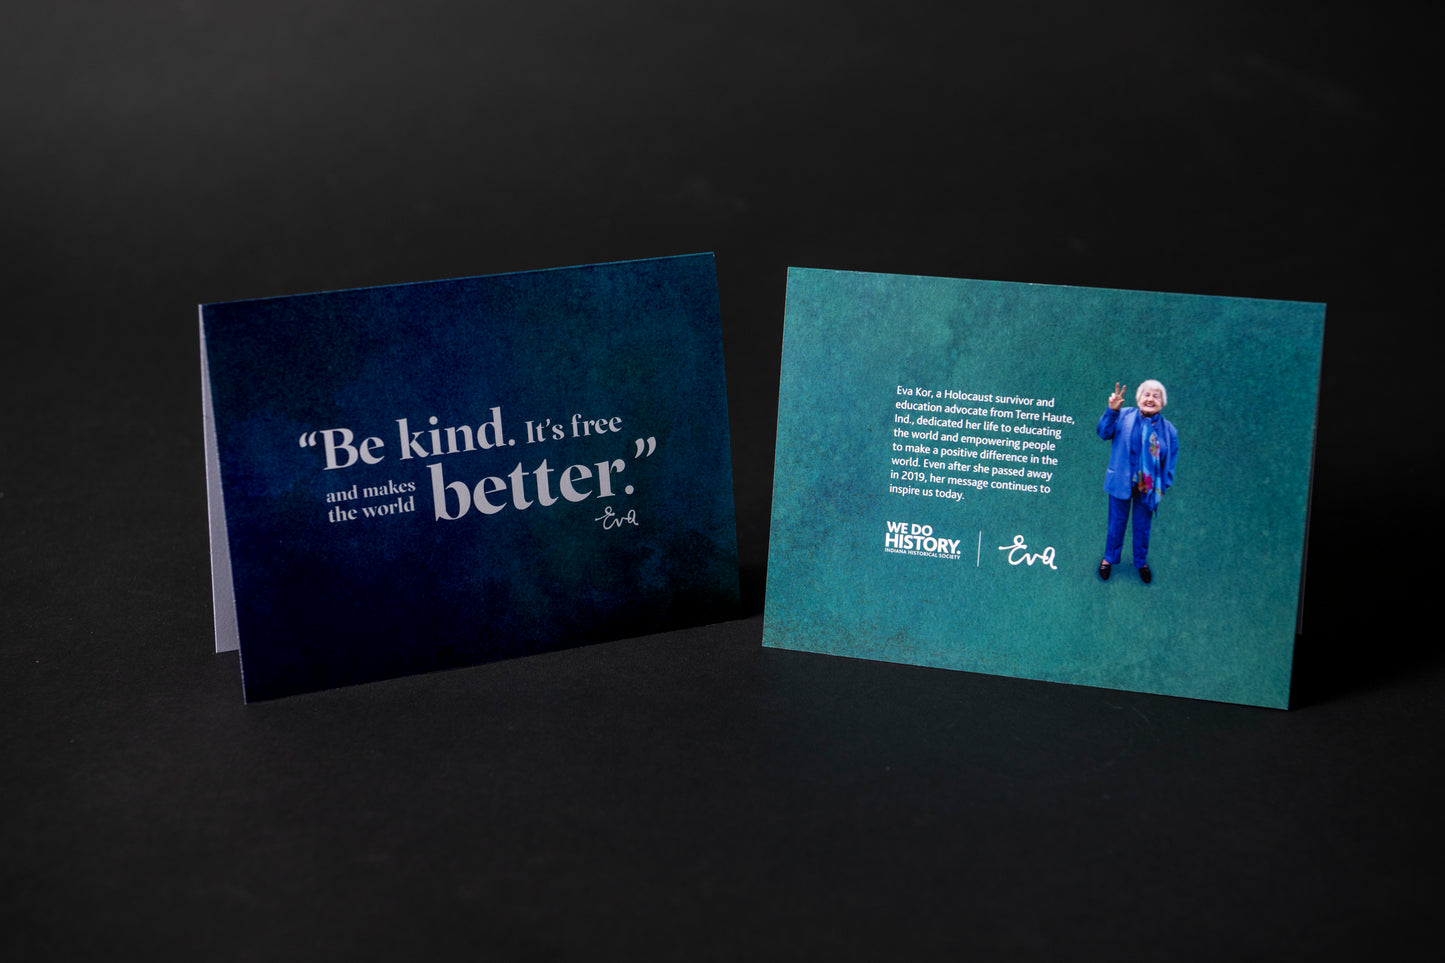 Notecard Set "Be Kind. It's Free and Makes the World Better."- Eva Kor